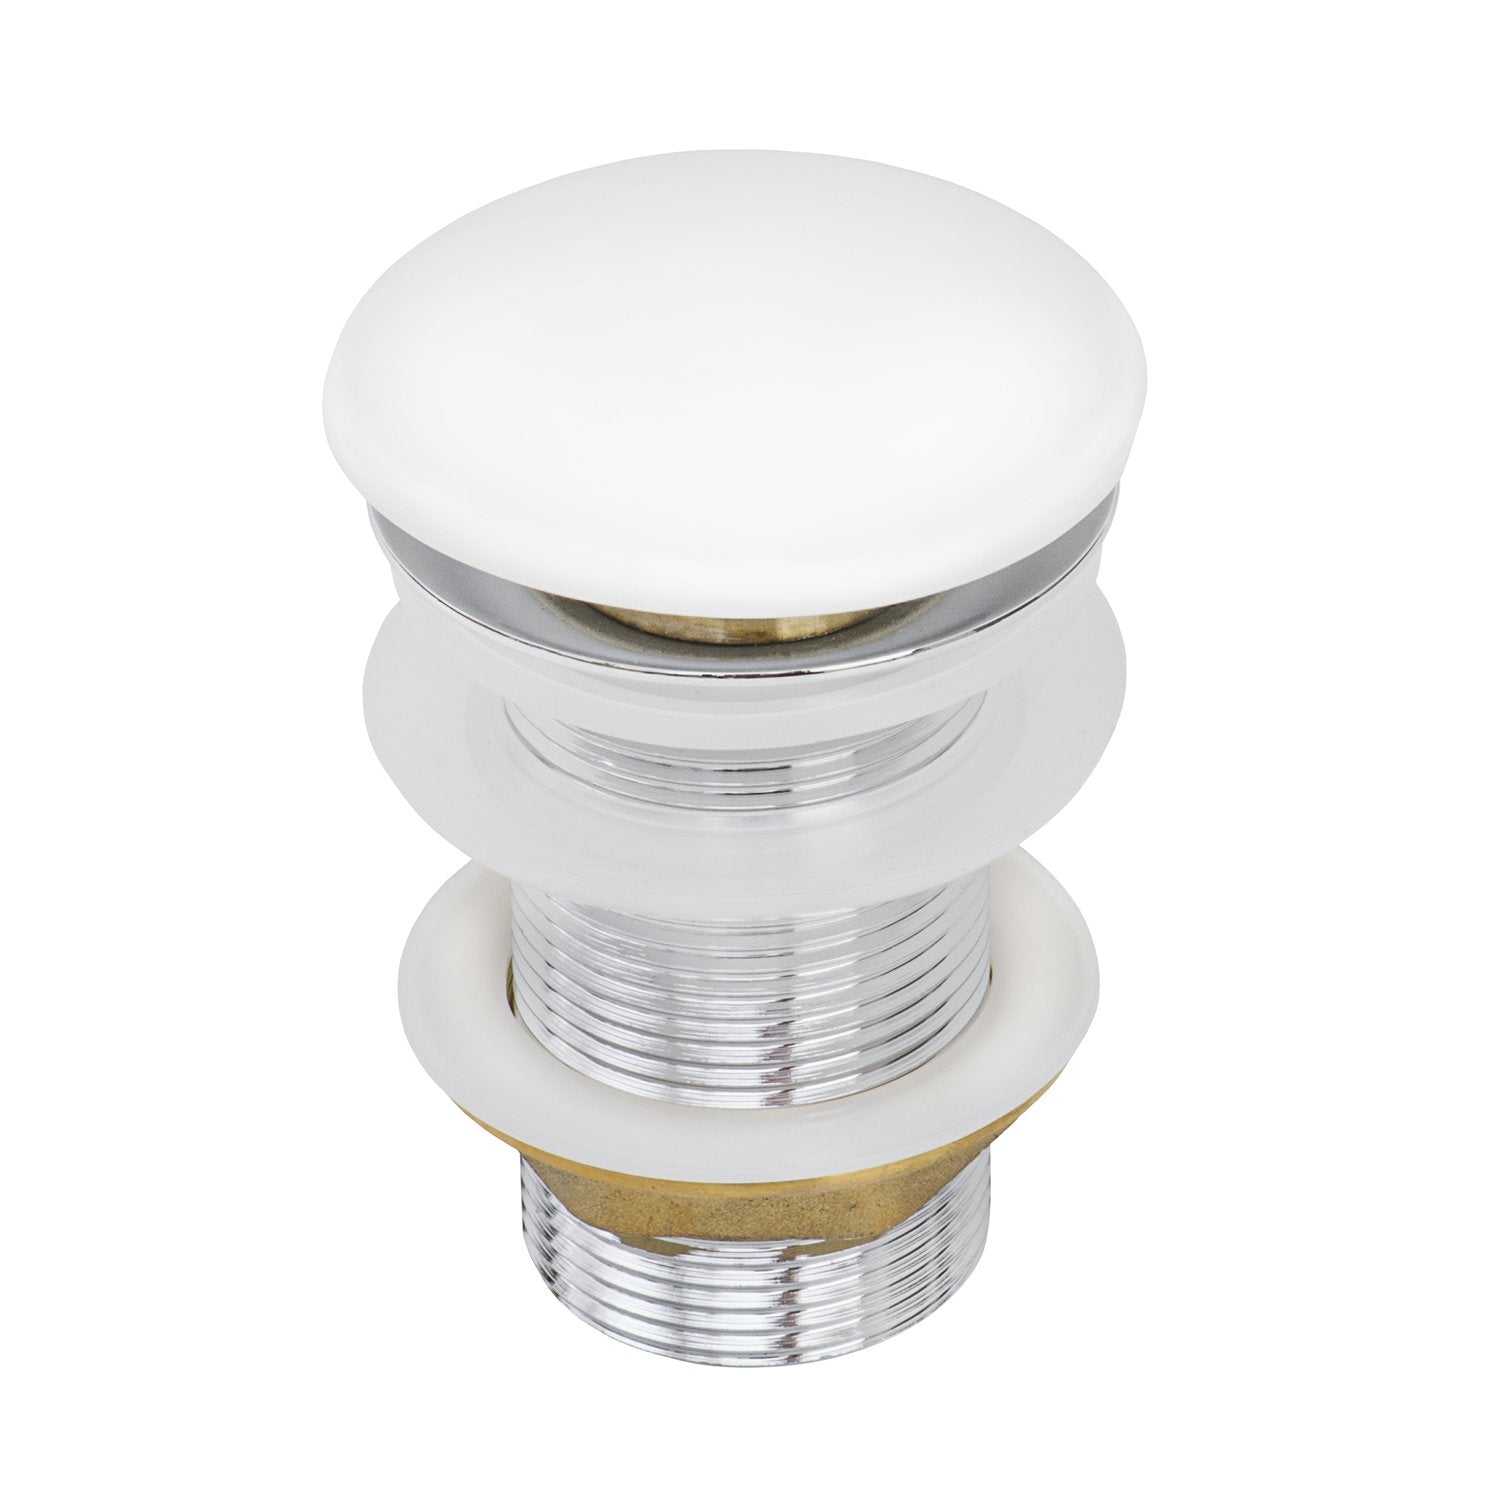 Ruvati White Ceramic Top Push Pop-up Drain for Bathroom Sinks without Overflow RVA5102WH